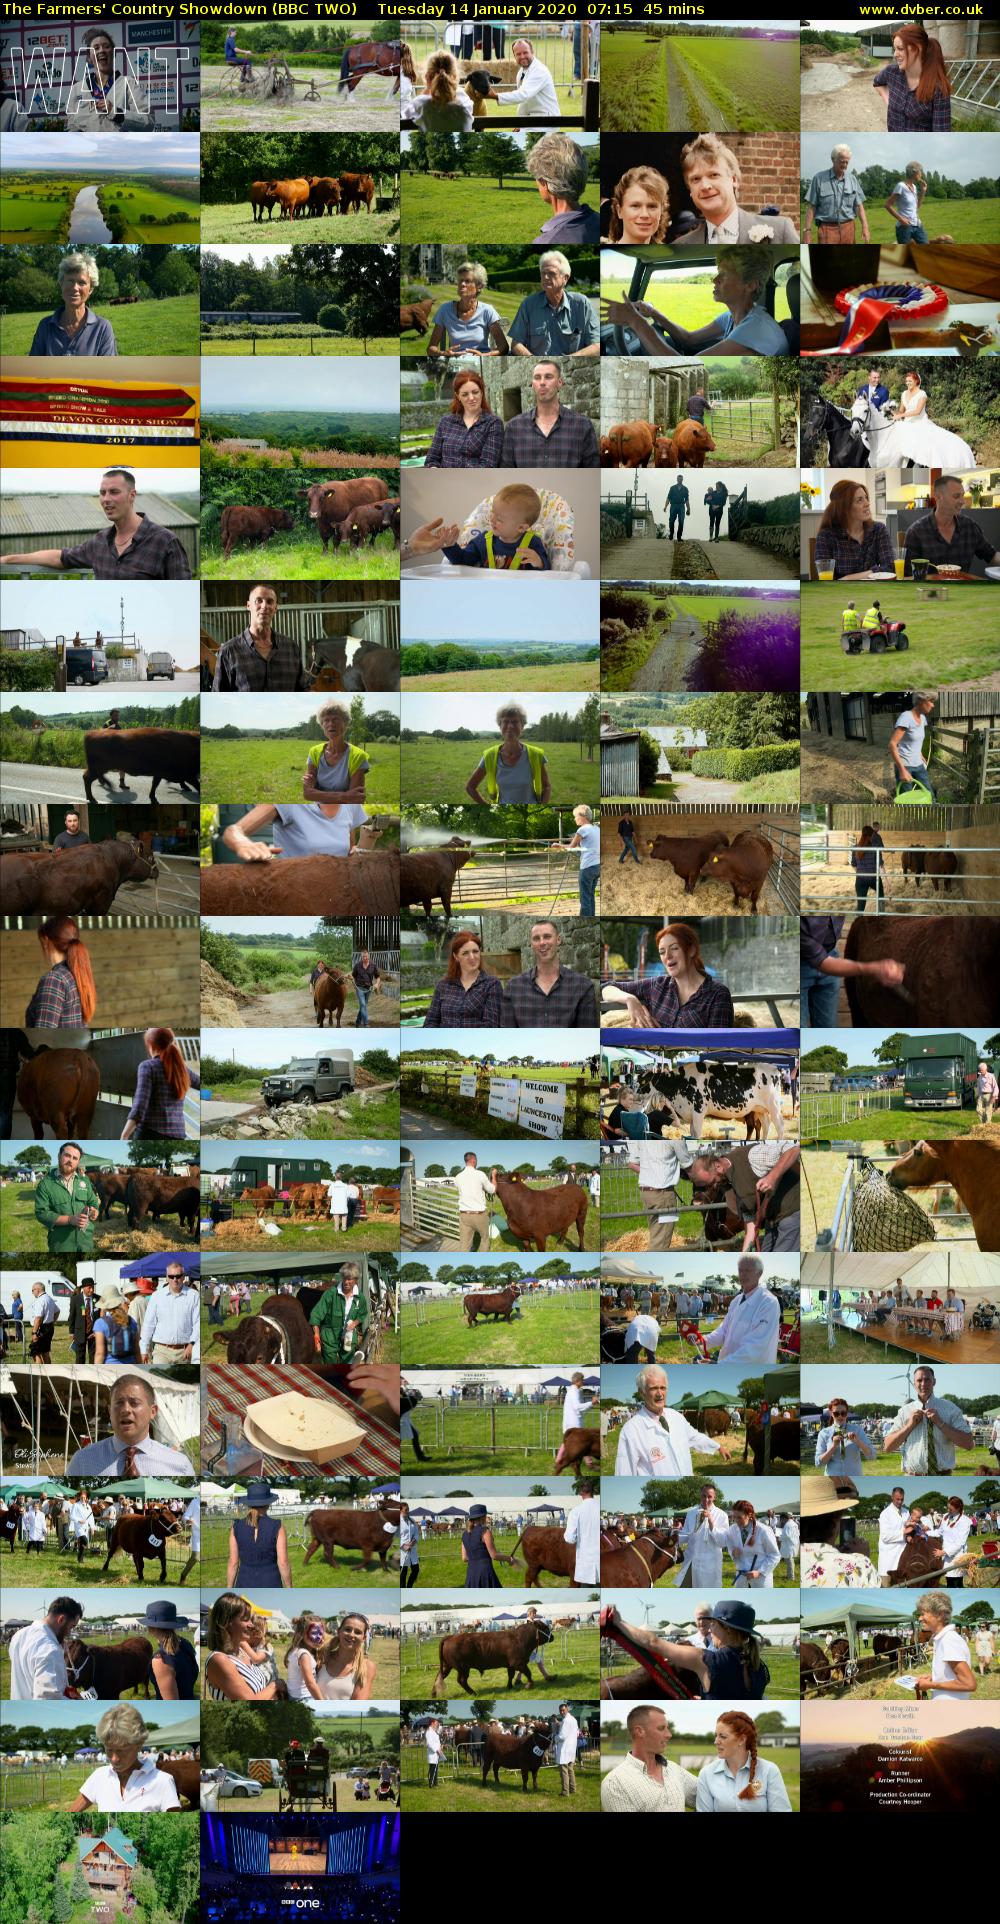 The Farmers' Country Showdown (BBC TWO) Tuesday 14 January 2020 07:15 - 08:00